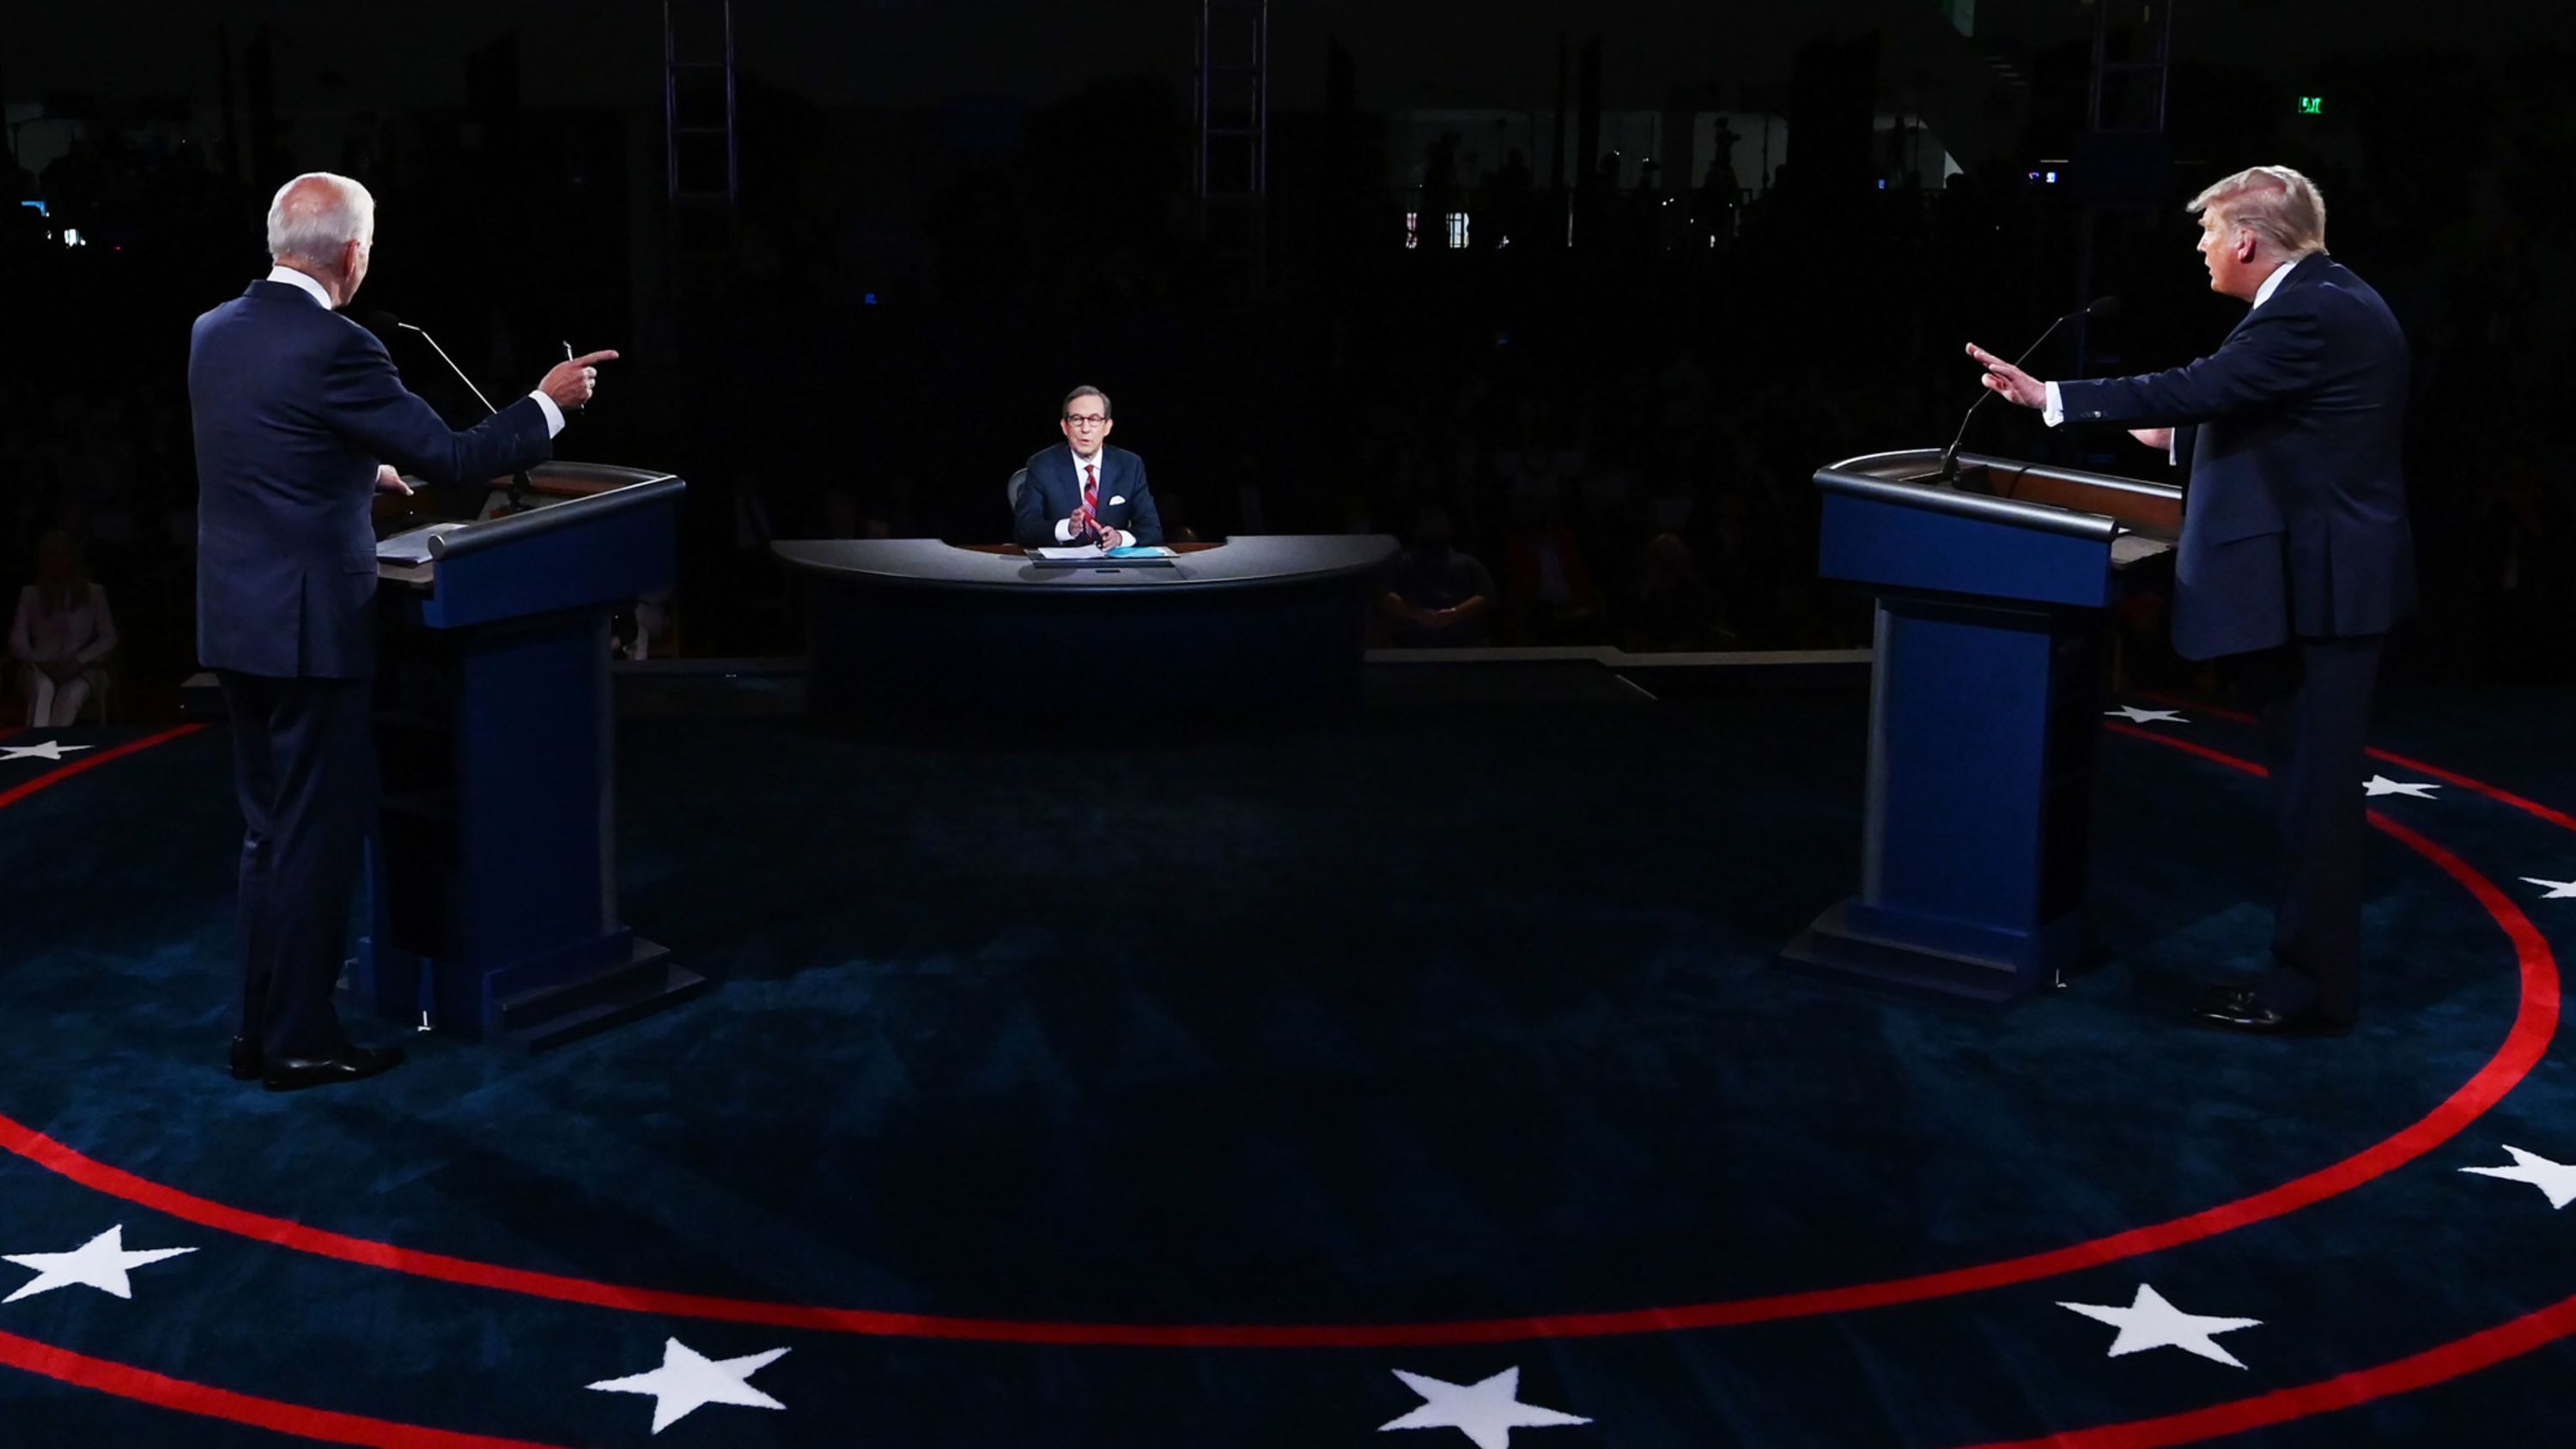 President Donald Trump, right, and Democratic nominee Joe Biden take part in the first presidential debate on Tuesday, September 29. At center is moderator Chris Wallace.